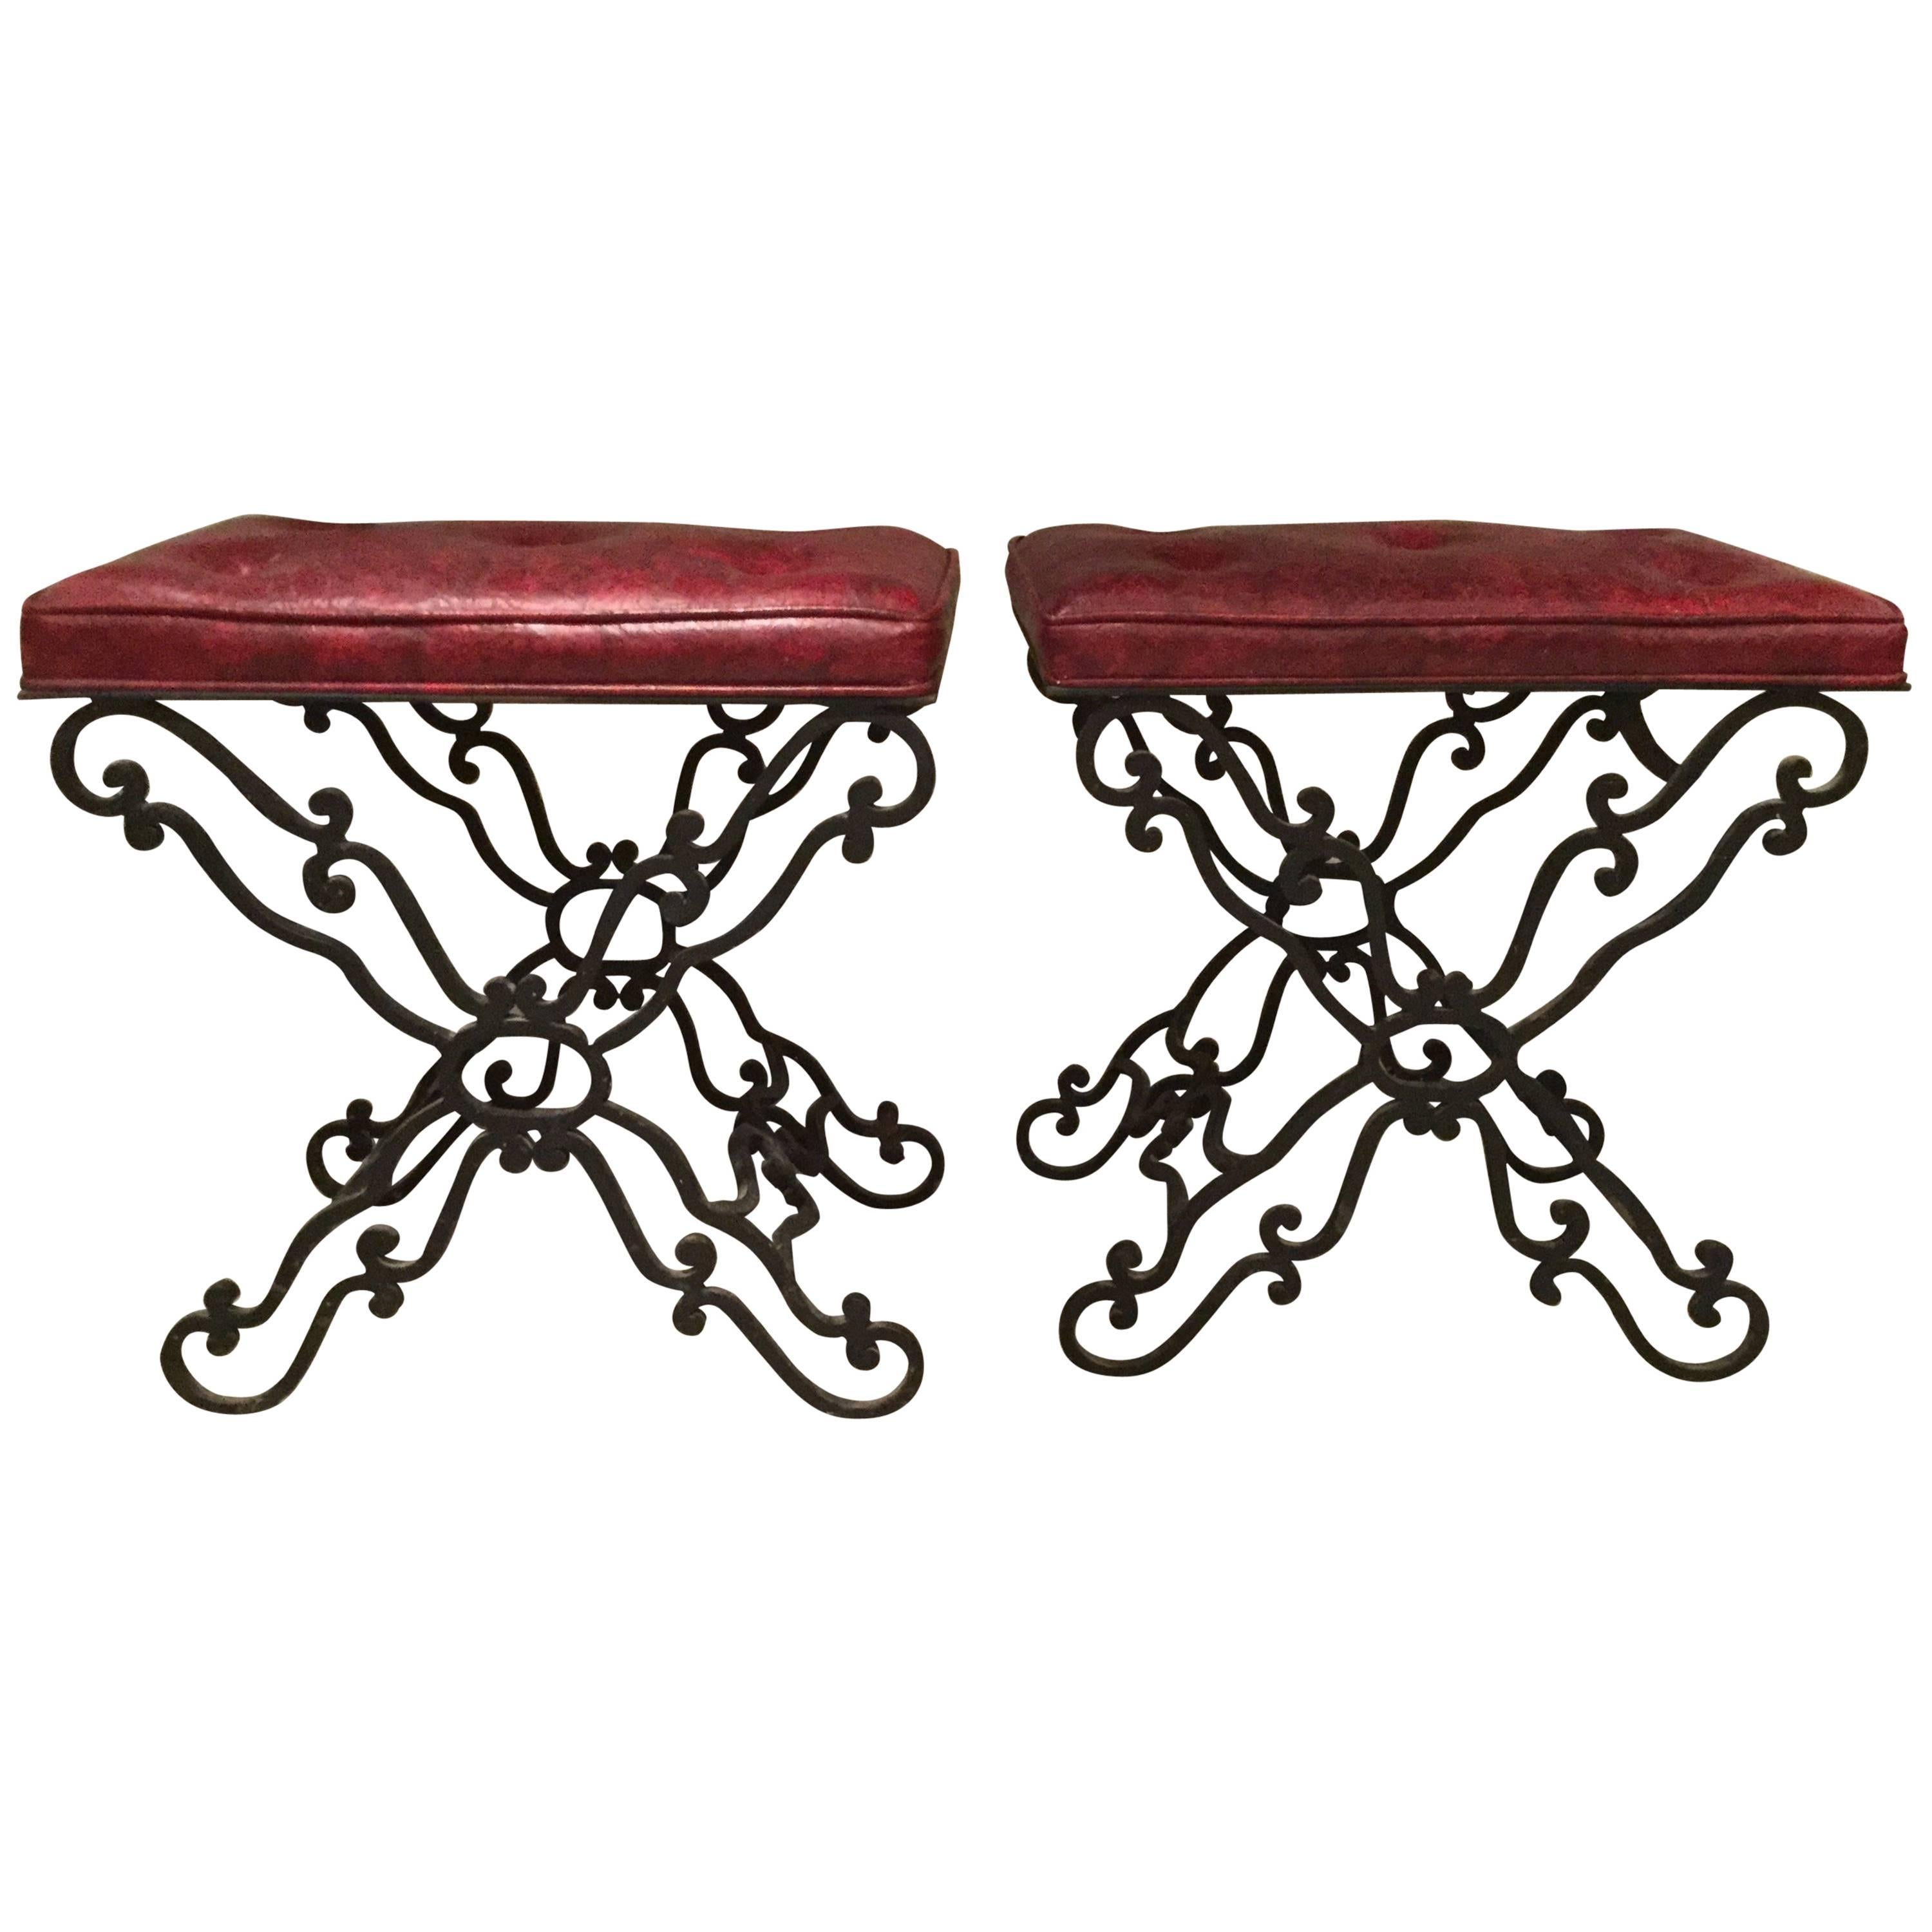 Pair of Continental Wrought Iron Benches or Ottomans